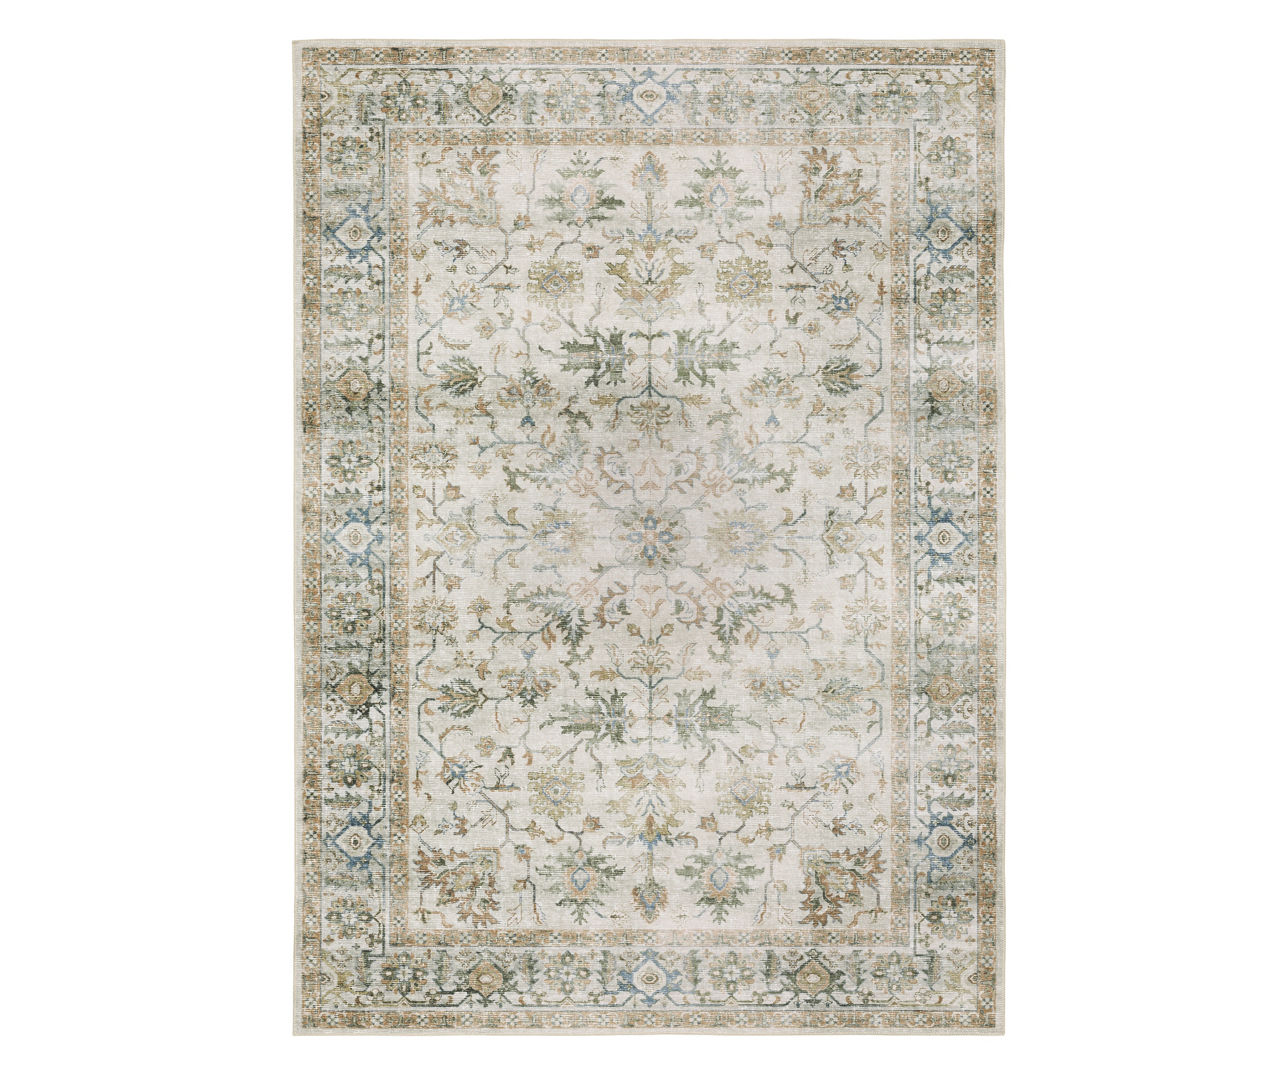 Chalkley Ivory & Green Floral Area Rug, (5' x 7')